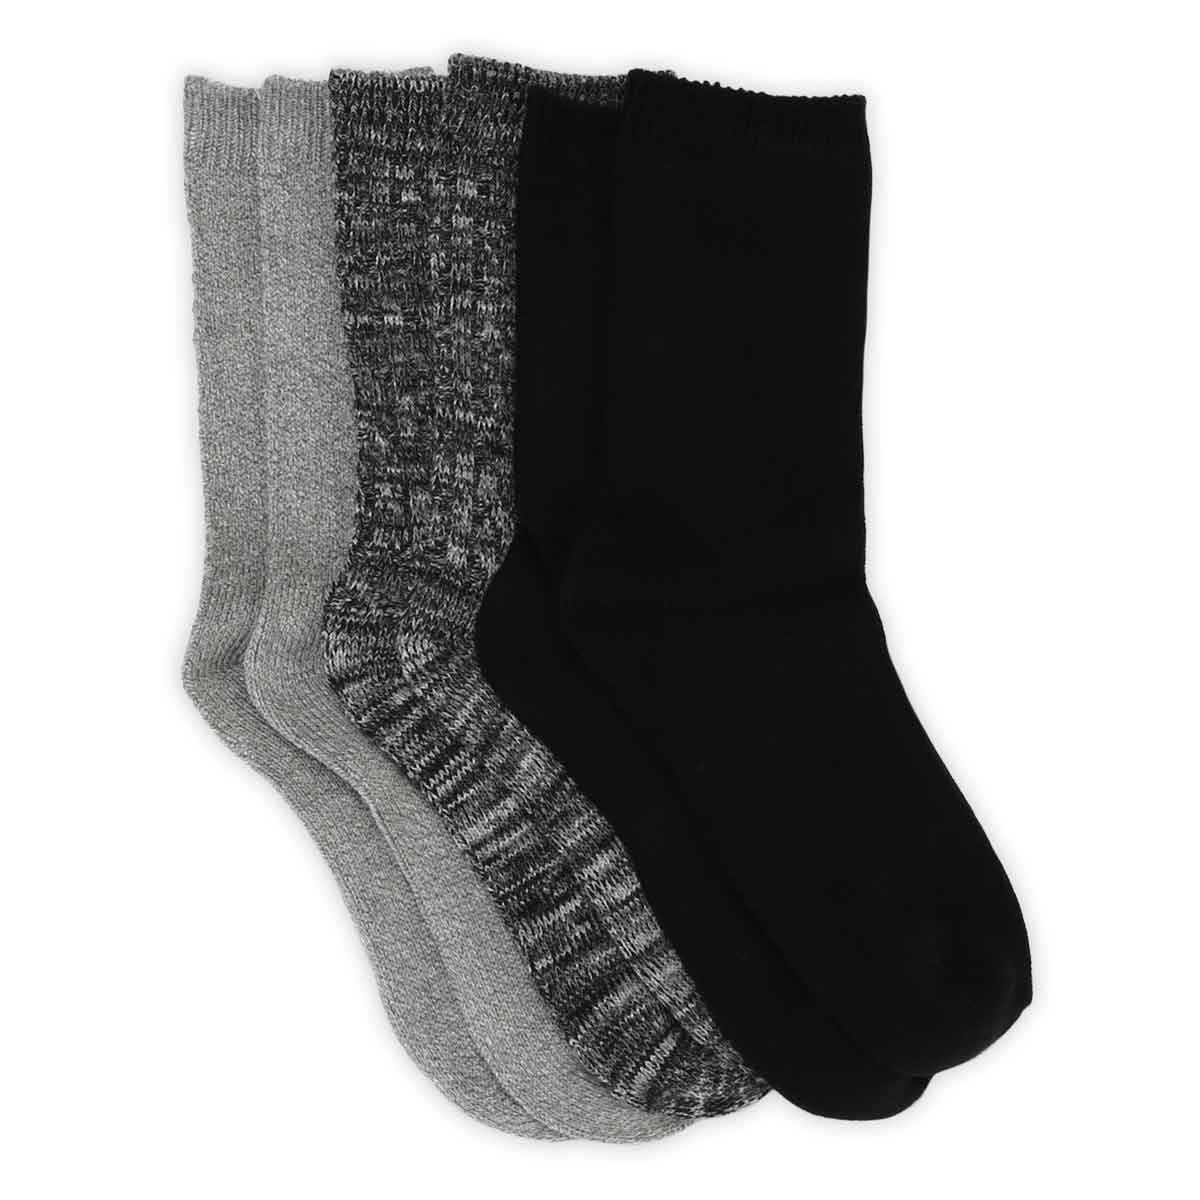 K Bell Women's Cable Knit Multi Crew Sock 3 P | SoftMoc.com